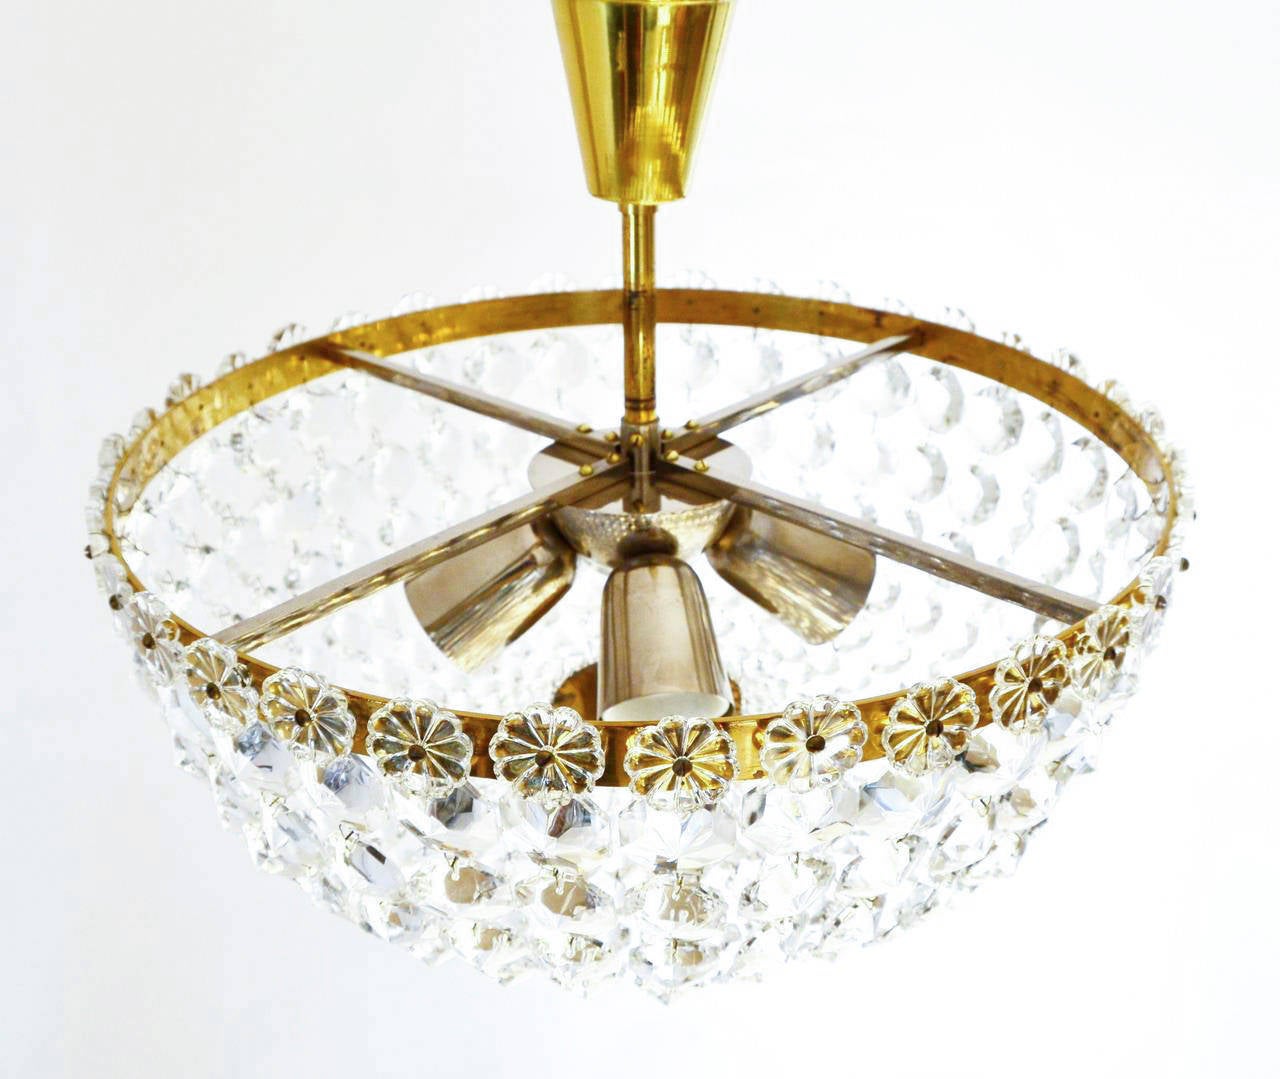 Mid-20th Century Brass and Nickel Basket Chandelier or Flush Mount by Bakalowits, Austria, 1950s